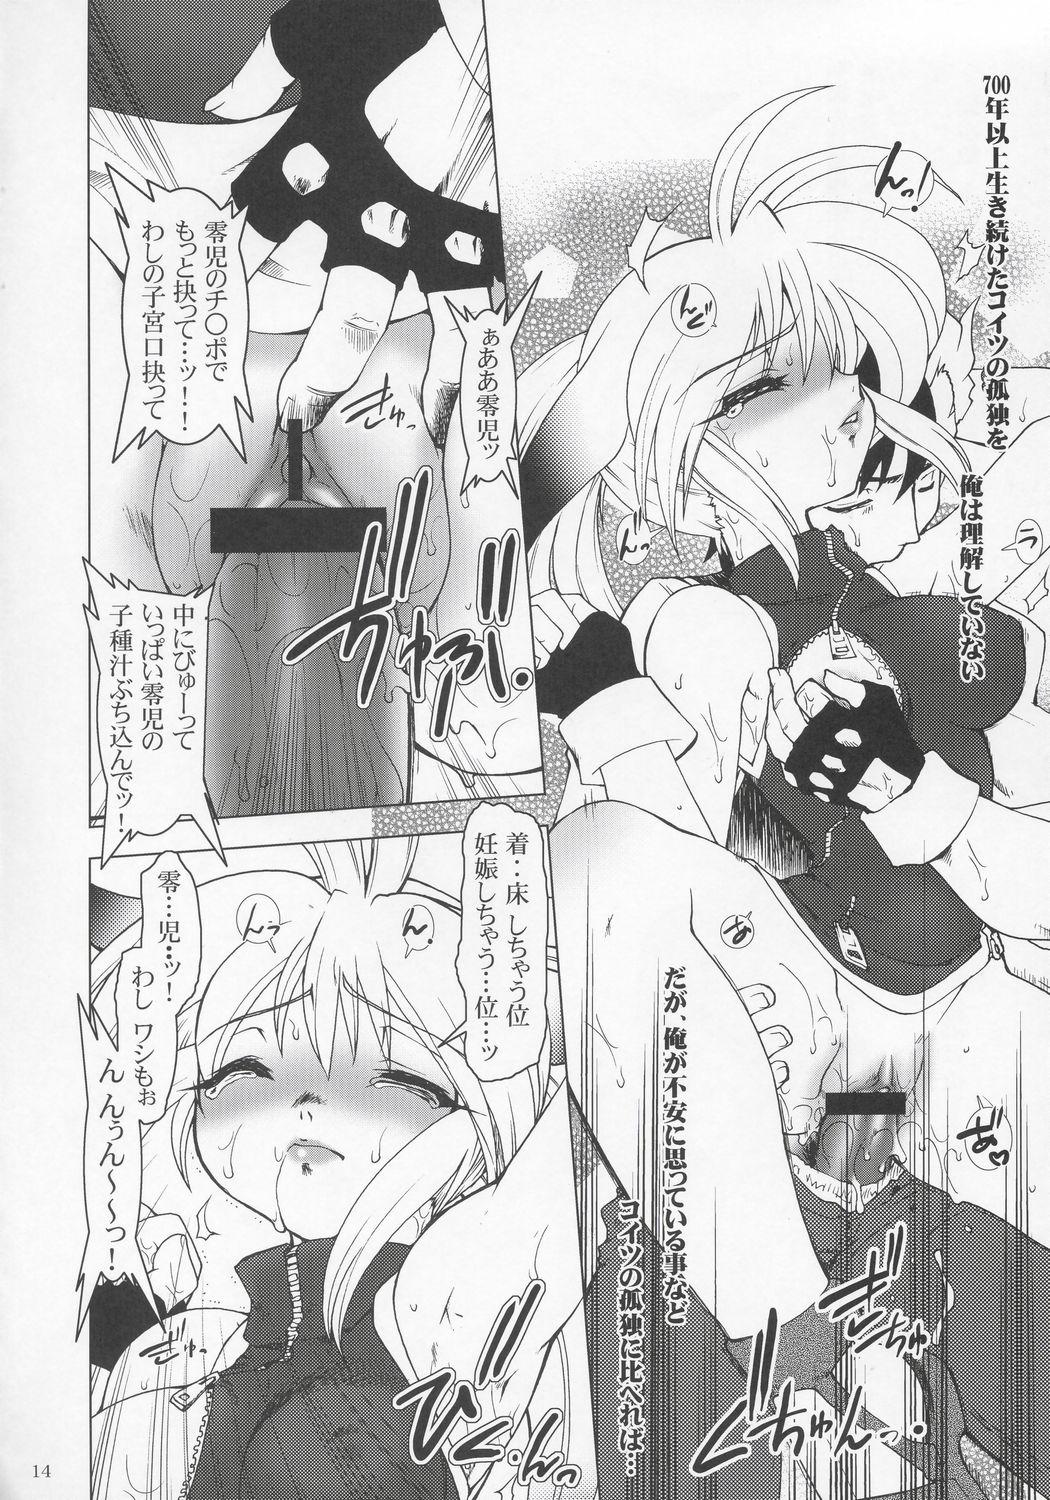 For NxC - Endless frontier Valkyrie no bouken Exhib - Page 13